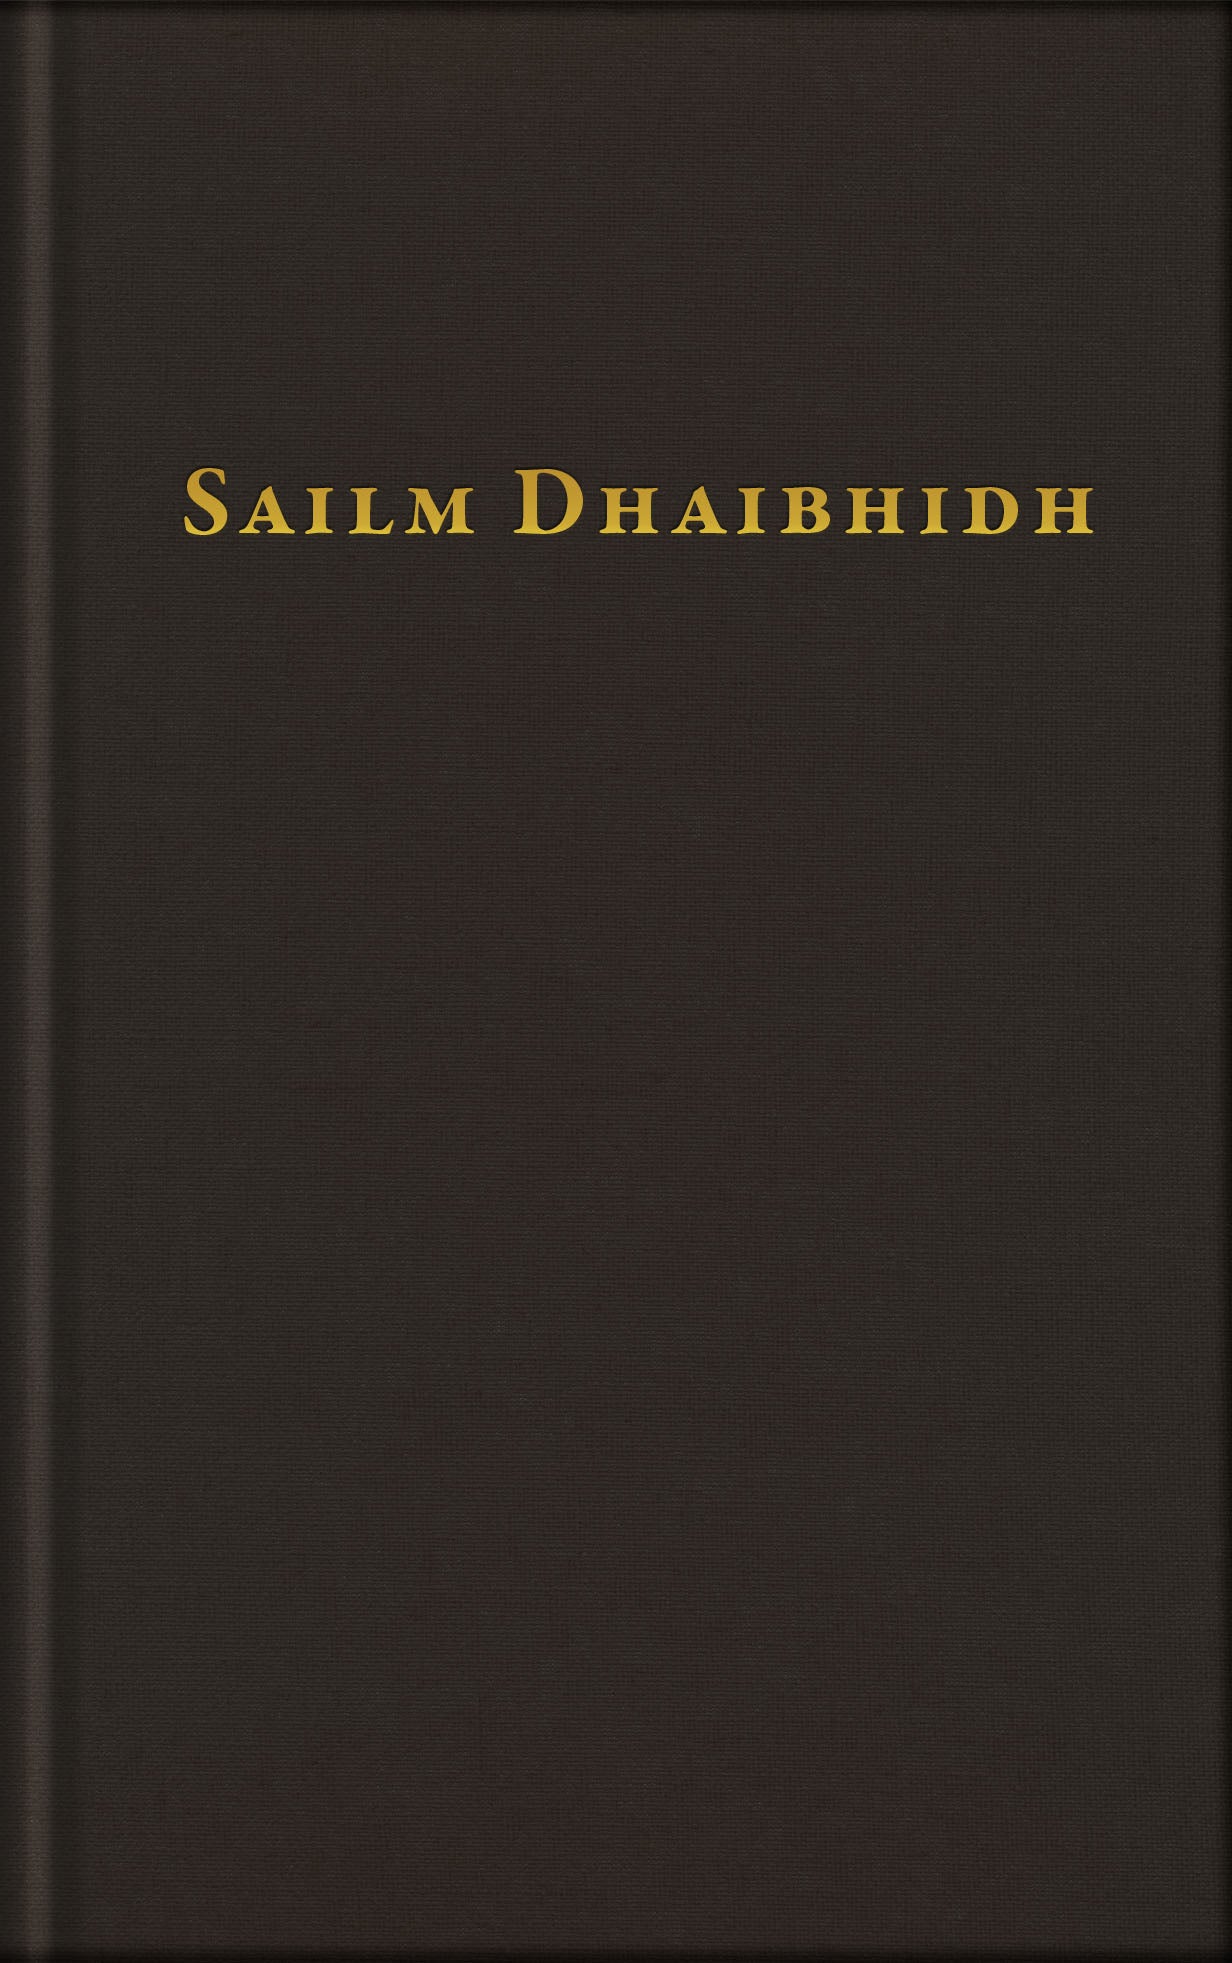 Image of Sailm Dhaibhidh other